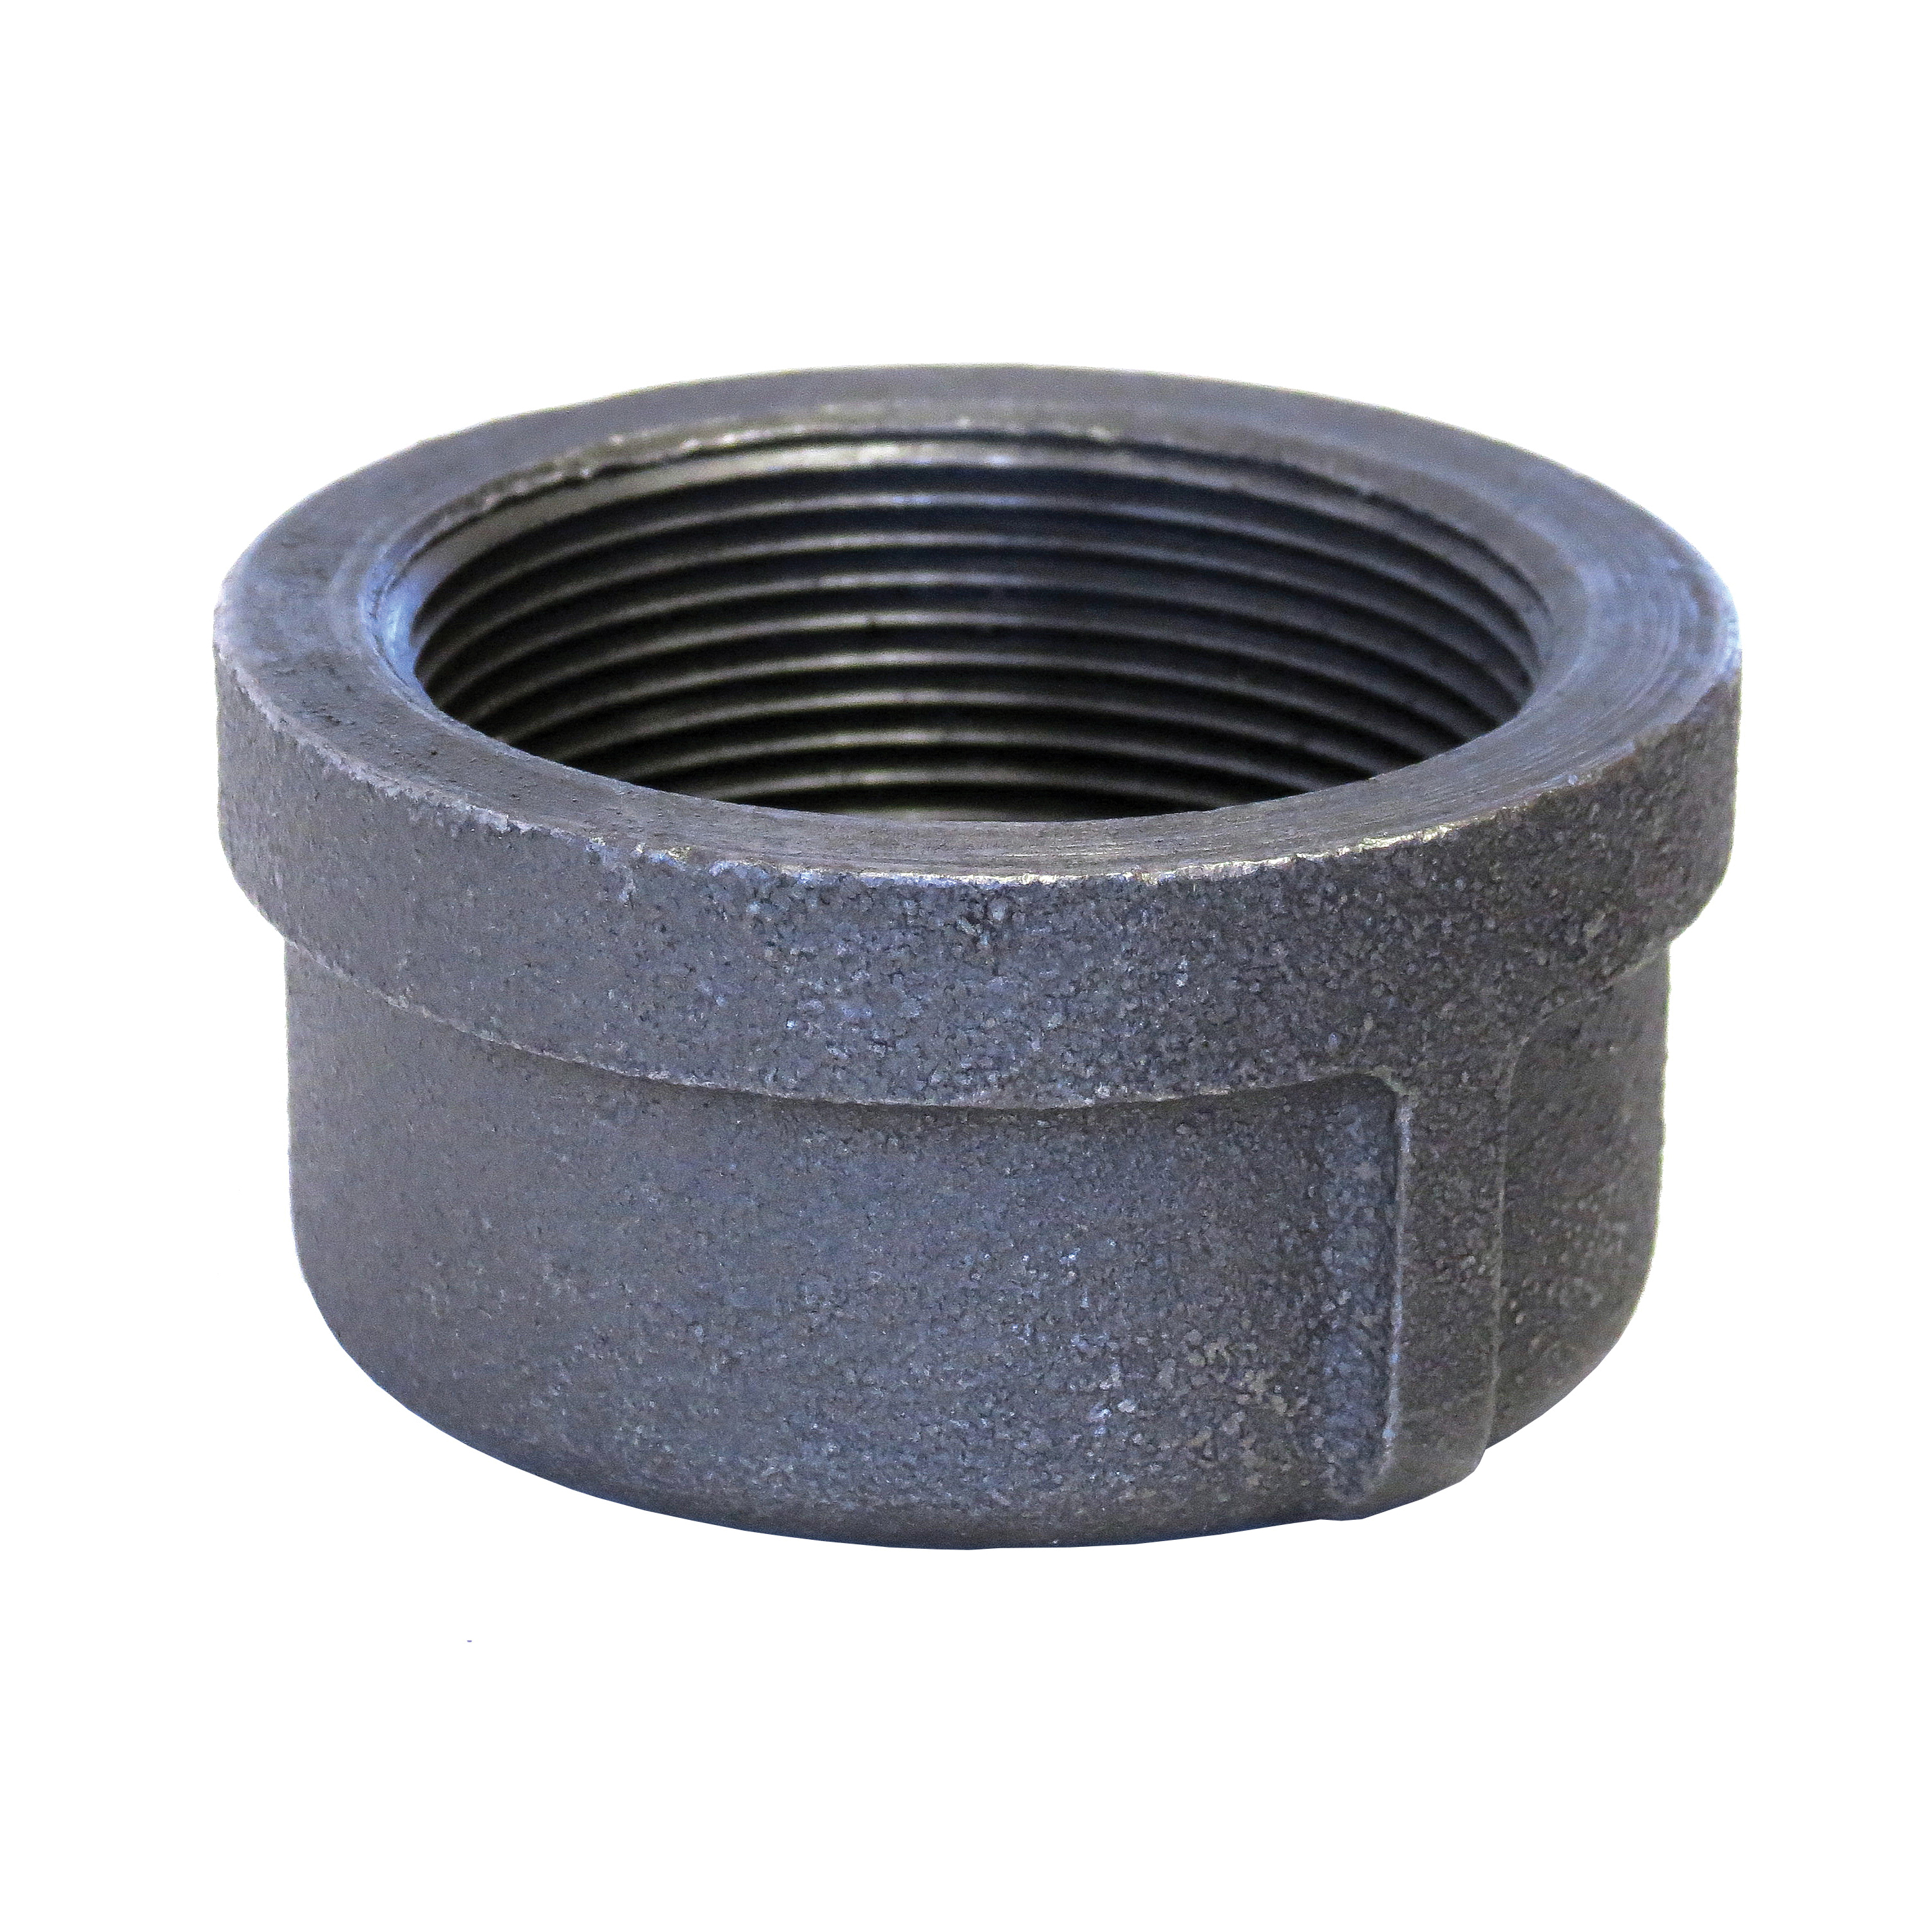 Anvil® 0318900727 FIG 1124 Standard Pipe Cap, 2 in Nominal, FNPT End Style, 150 lb, Malleable Iron, Black Oxide, Domestic